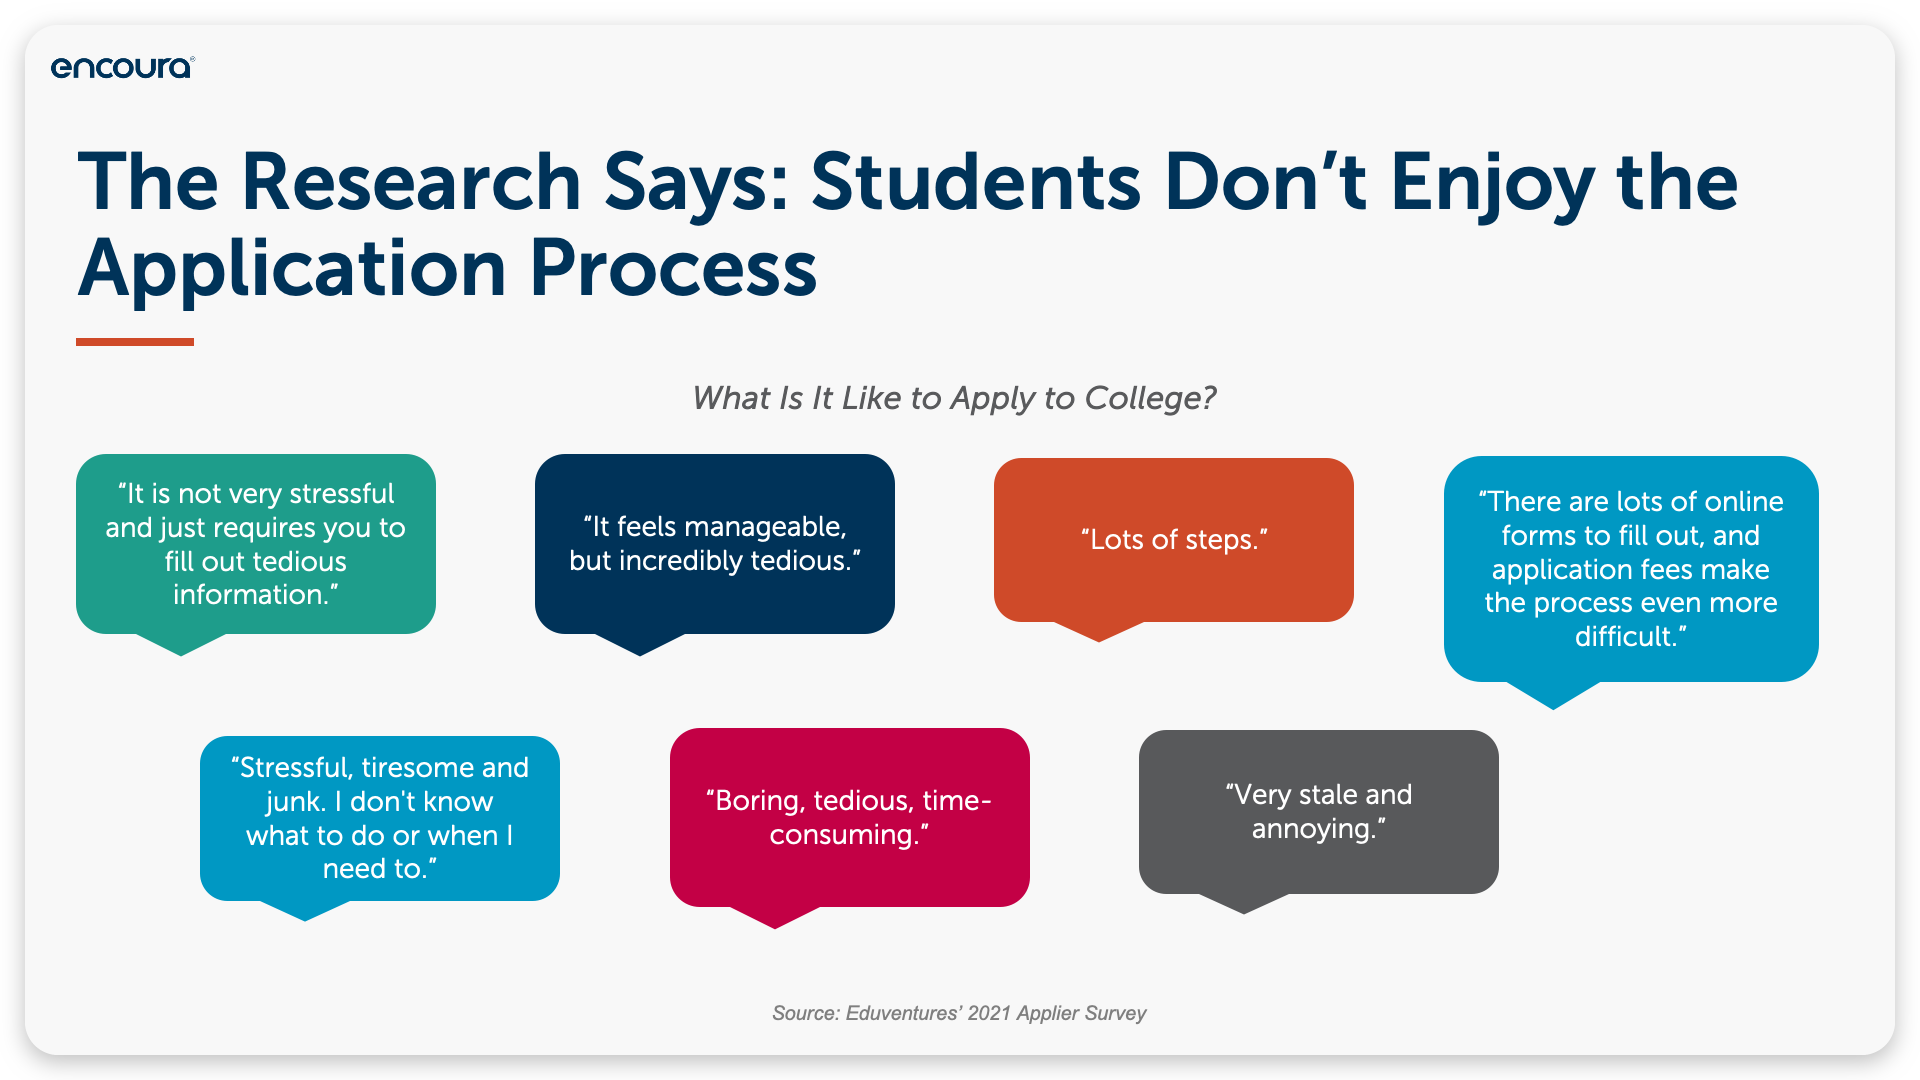 The Research Says: Students Don't Enjoy the Application Process